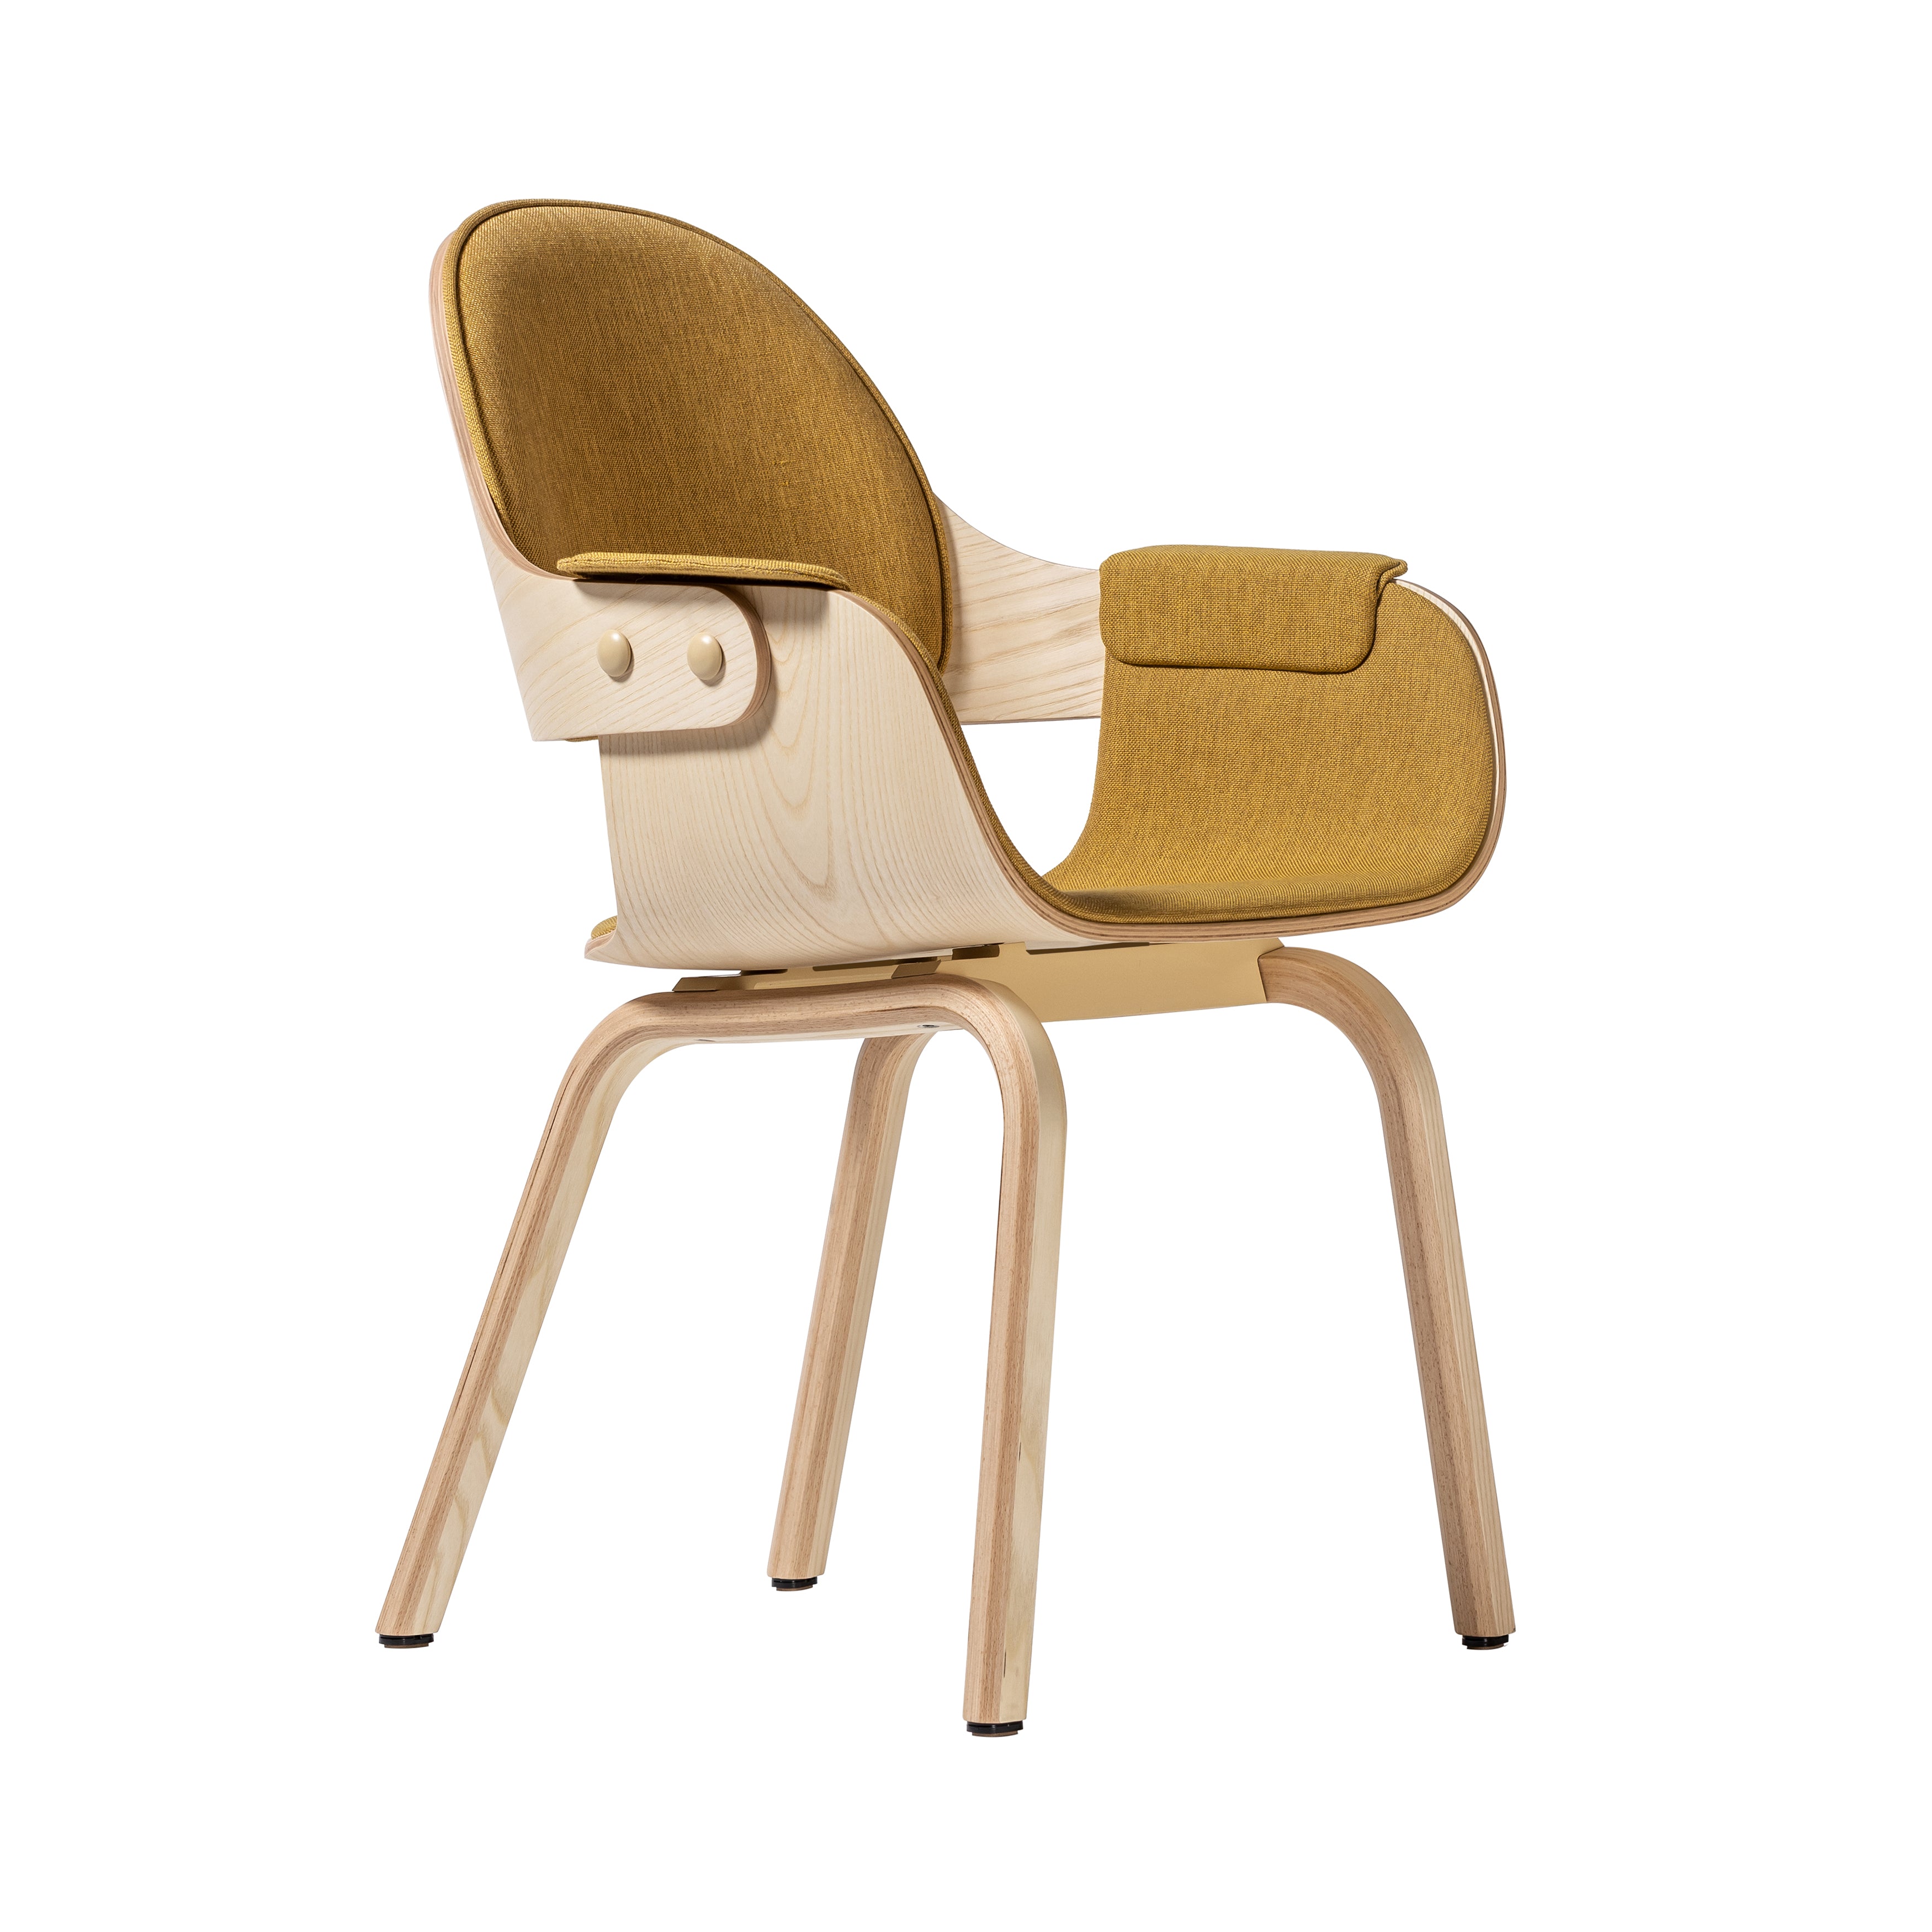 Showtime Nude Chair: Interior Seat + Armrest + Backrest Cushion + Natural Ash